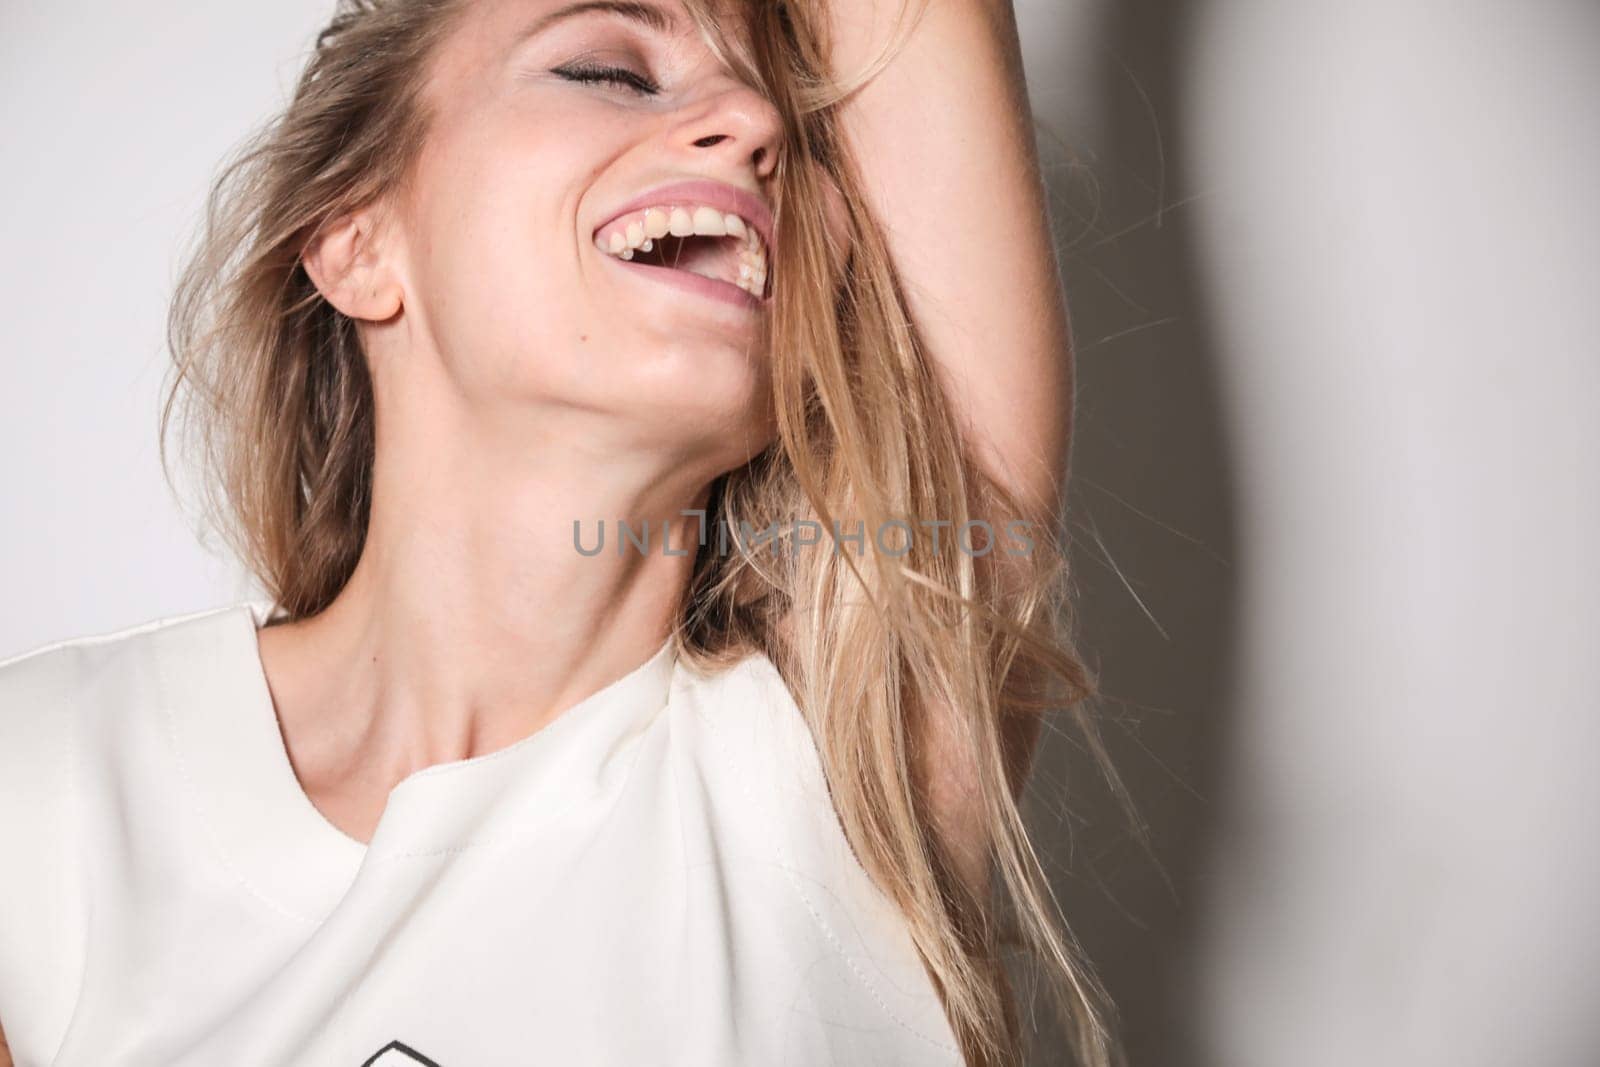 A young model, blonde, dressed in a T-shirt with trimmed sleeves, placed in front of a white wall and illuminated by a strong flash light, laughs out laughing with her eyes closed, resting her head on her arm.